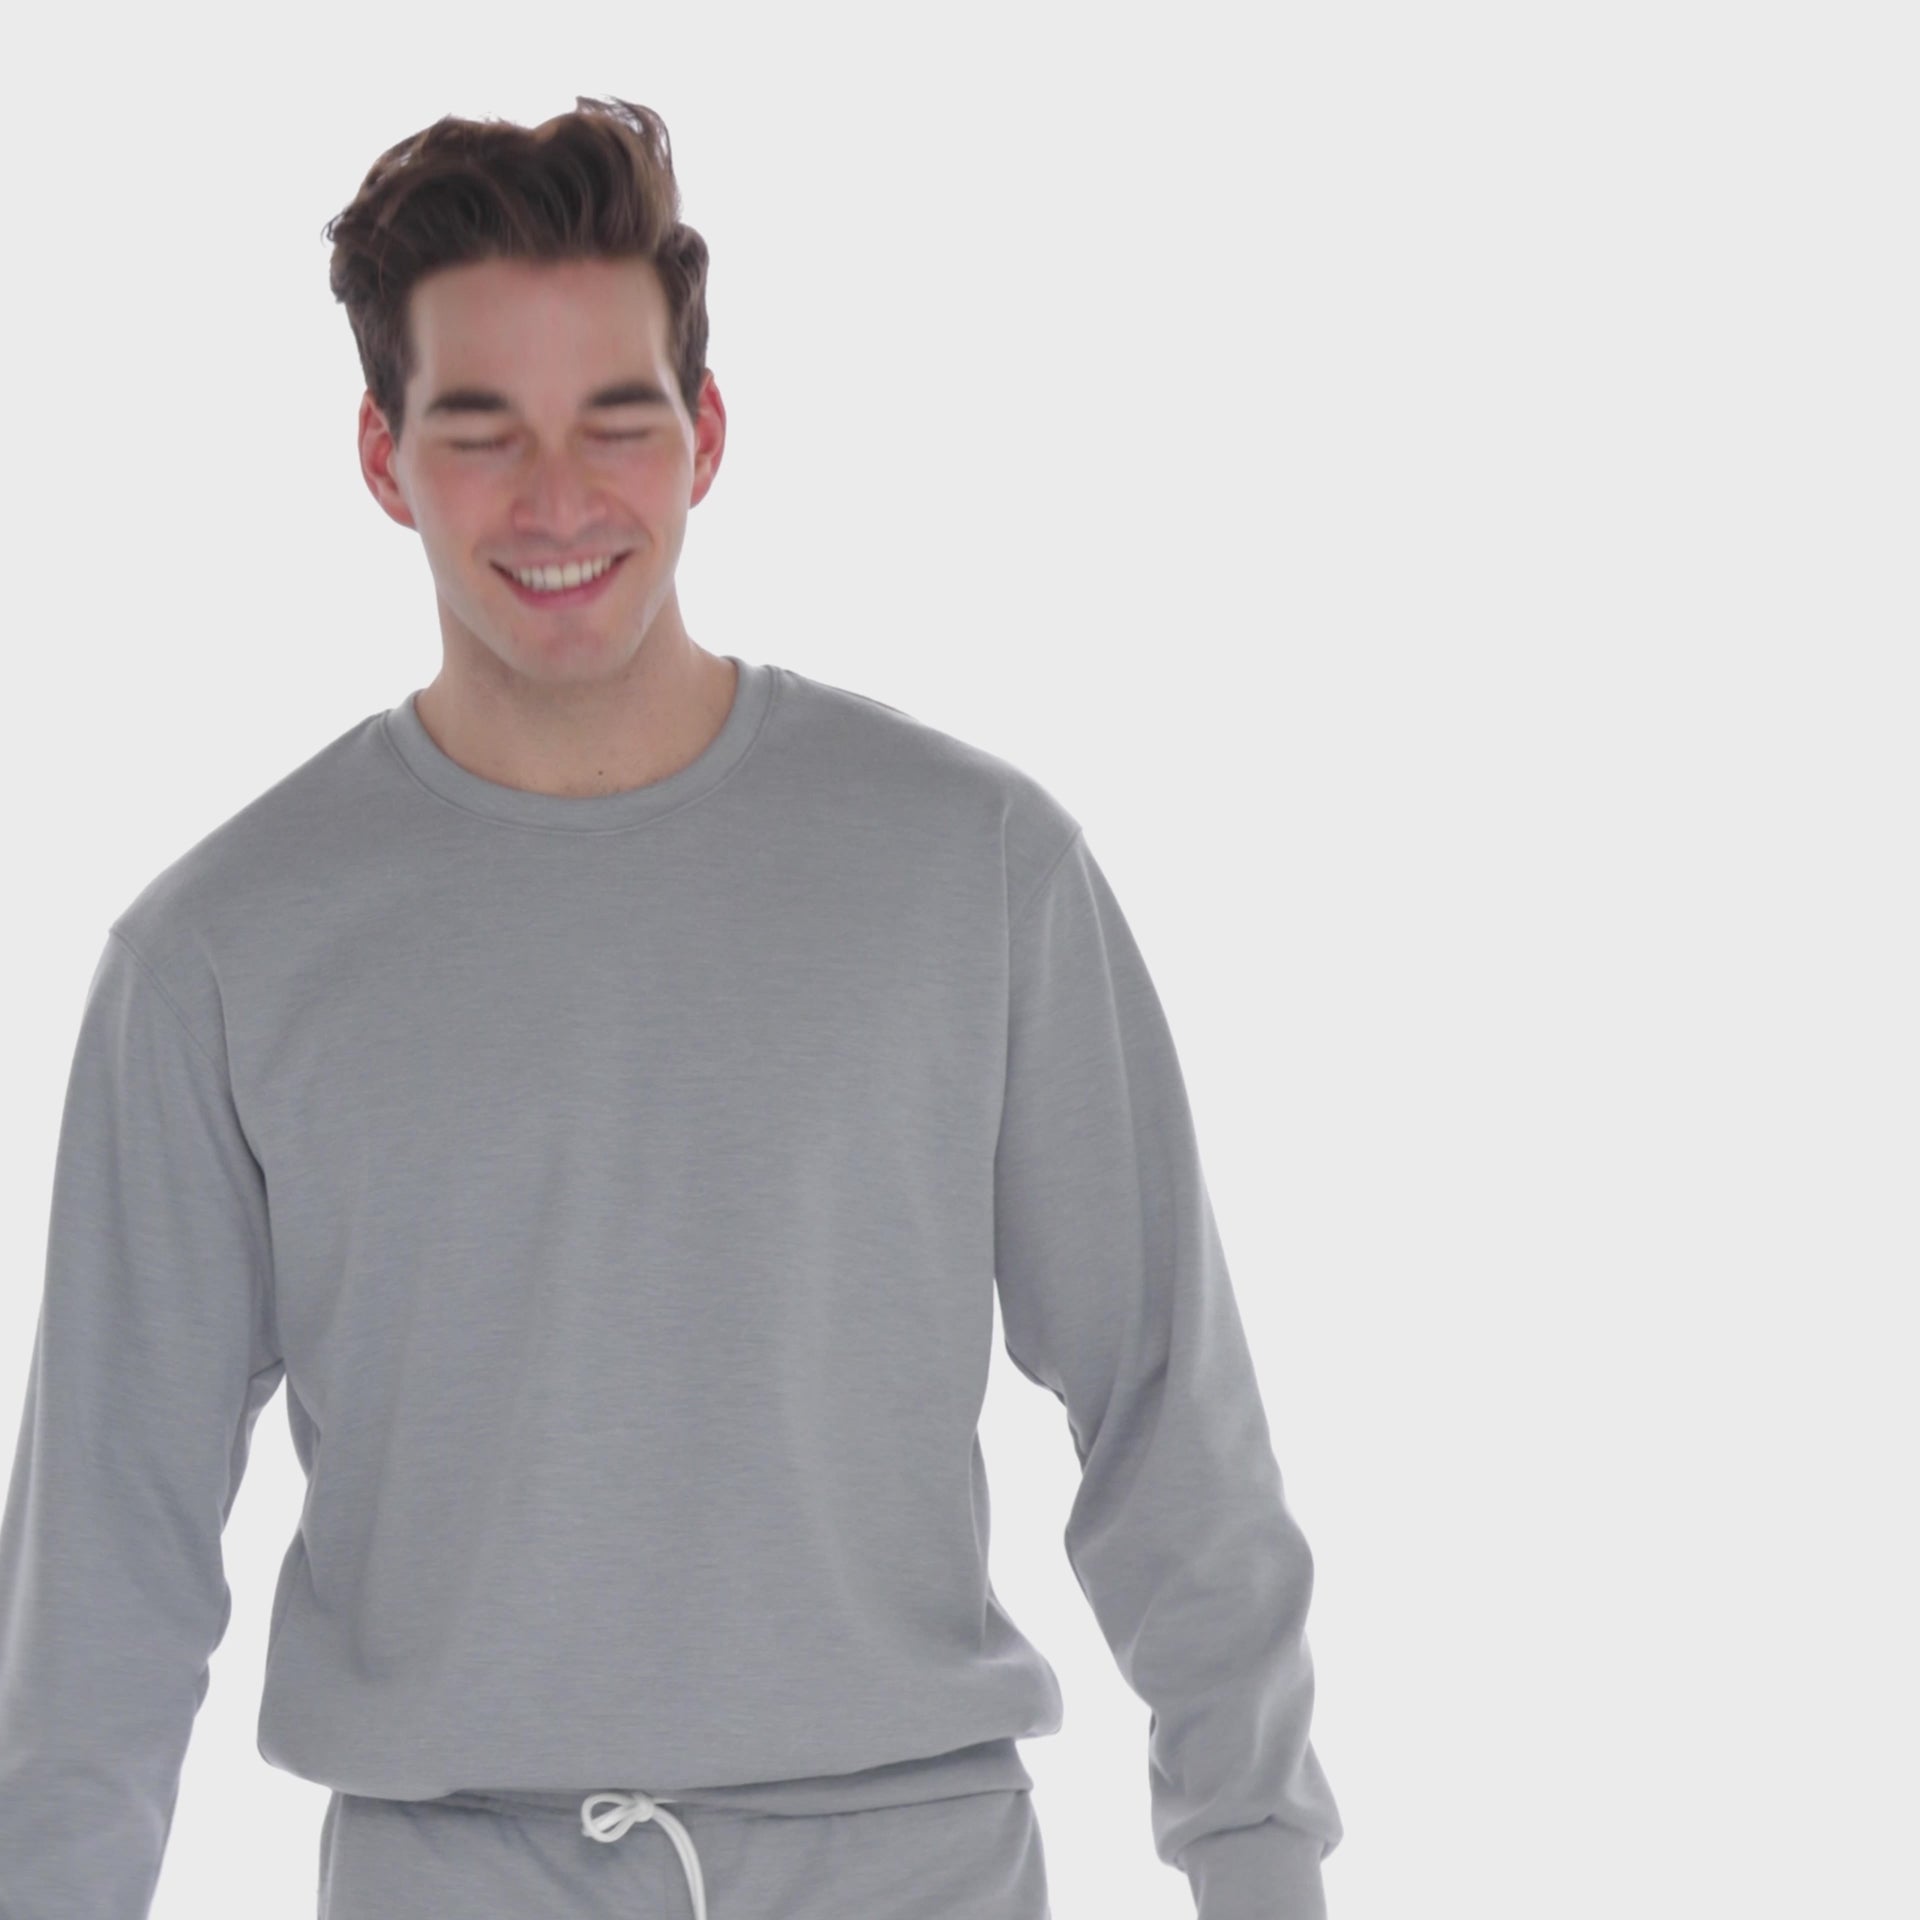 A WHITE WALL VIDEO OF A MALE MODEL WEARING THE SAMMY SHOP UNISEX GRAY EVERYDAY CREW SWEATSHIRT